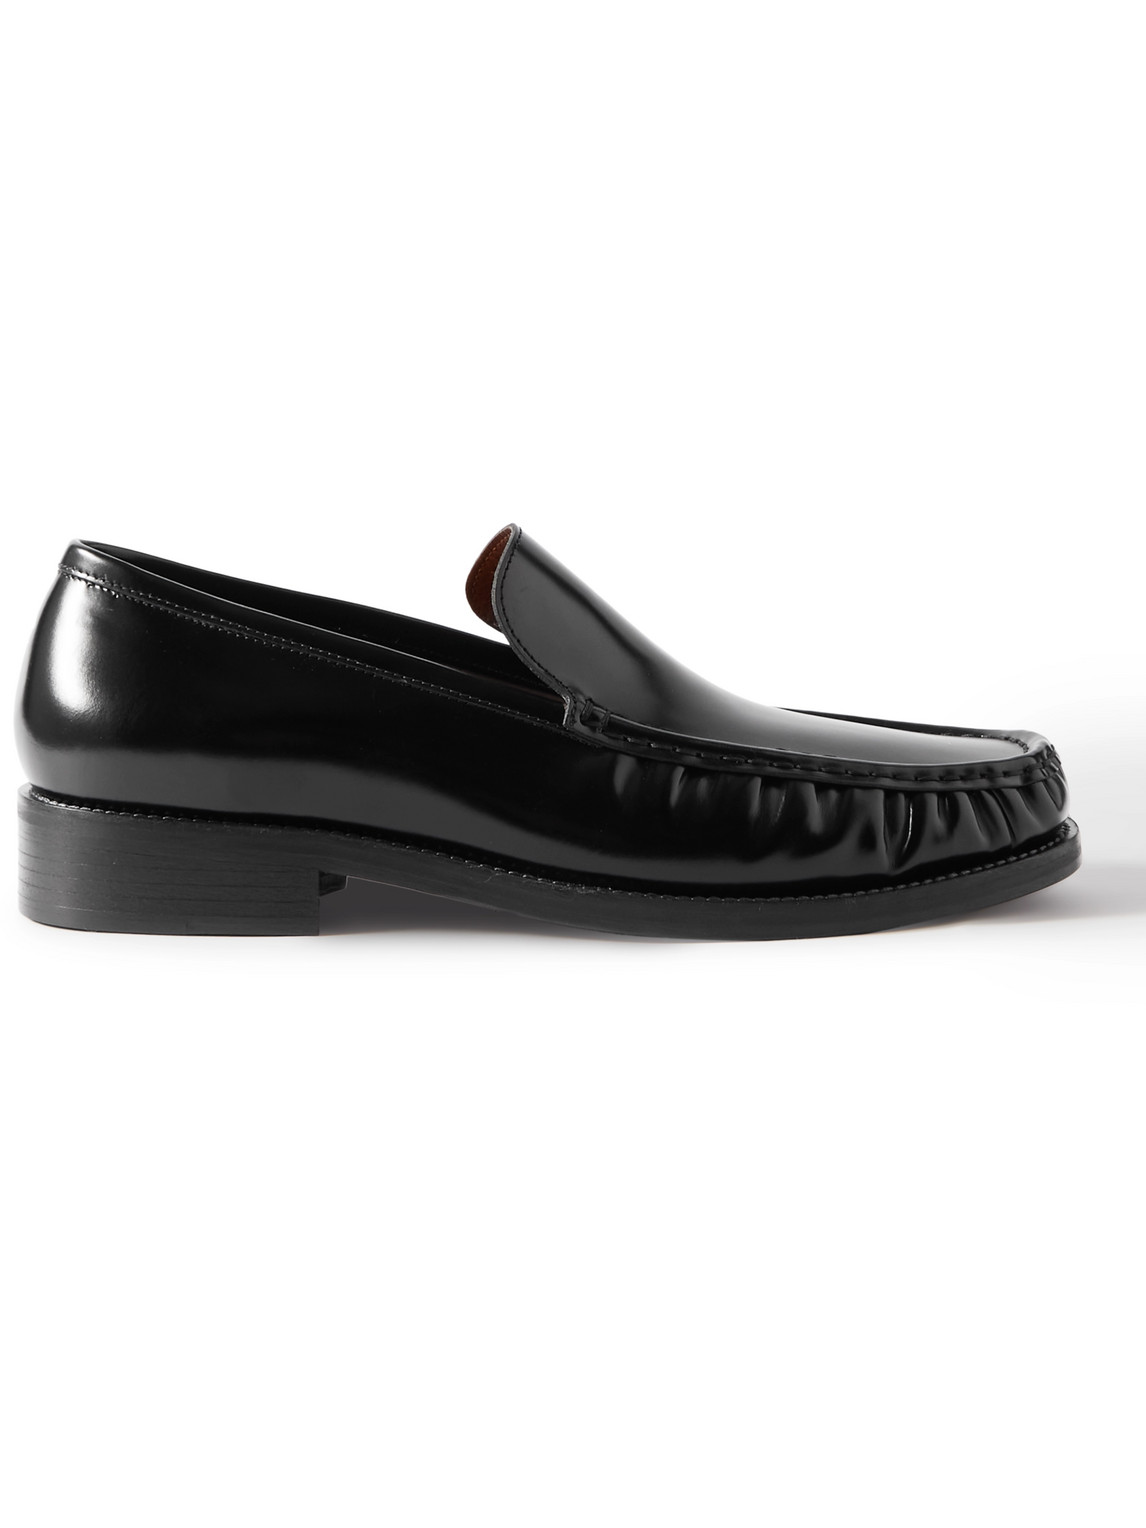 ACNE STUDIOS LEATHER LOAFERS